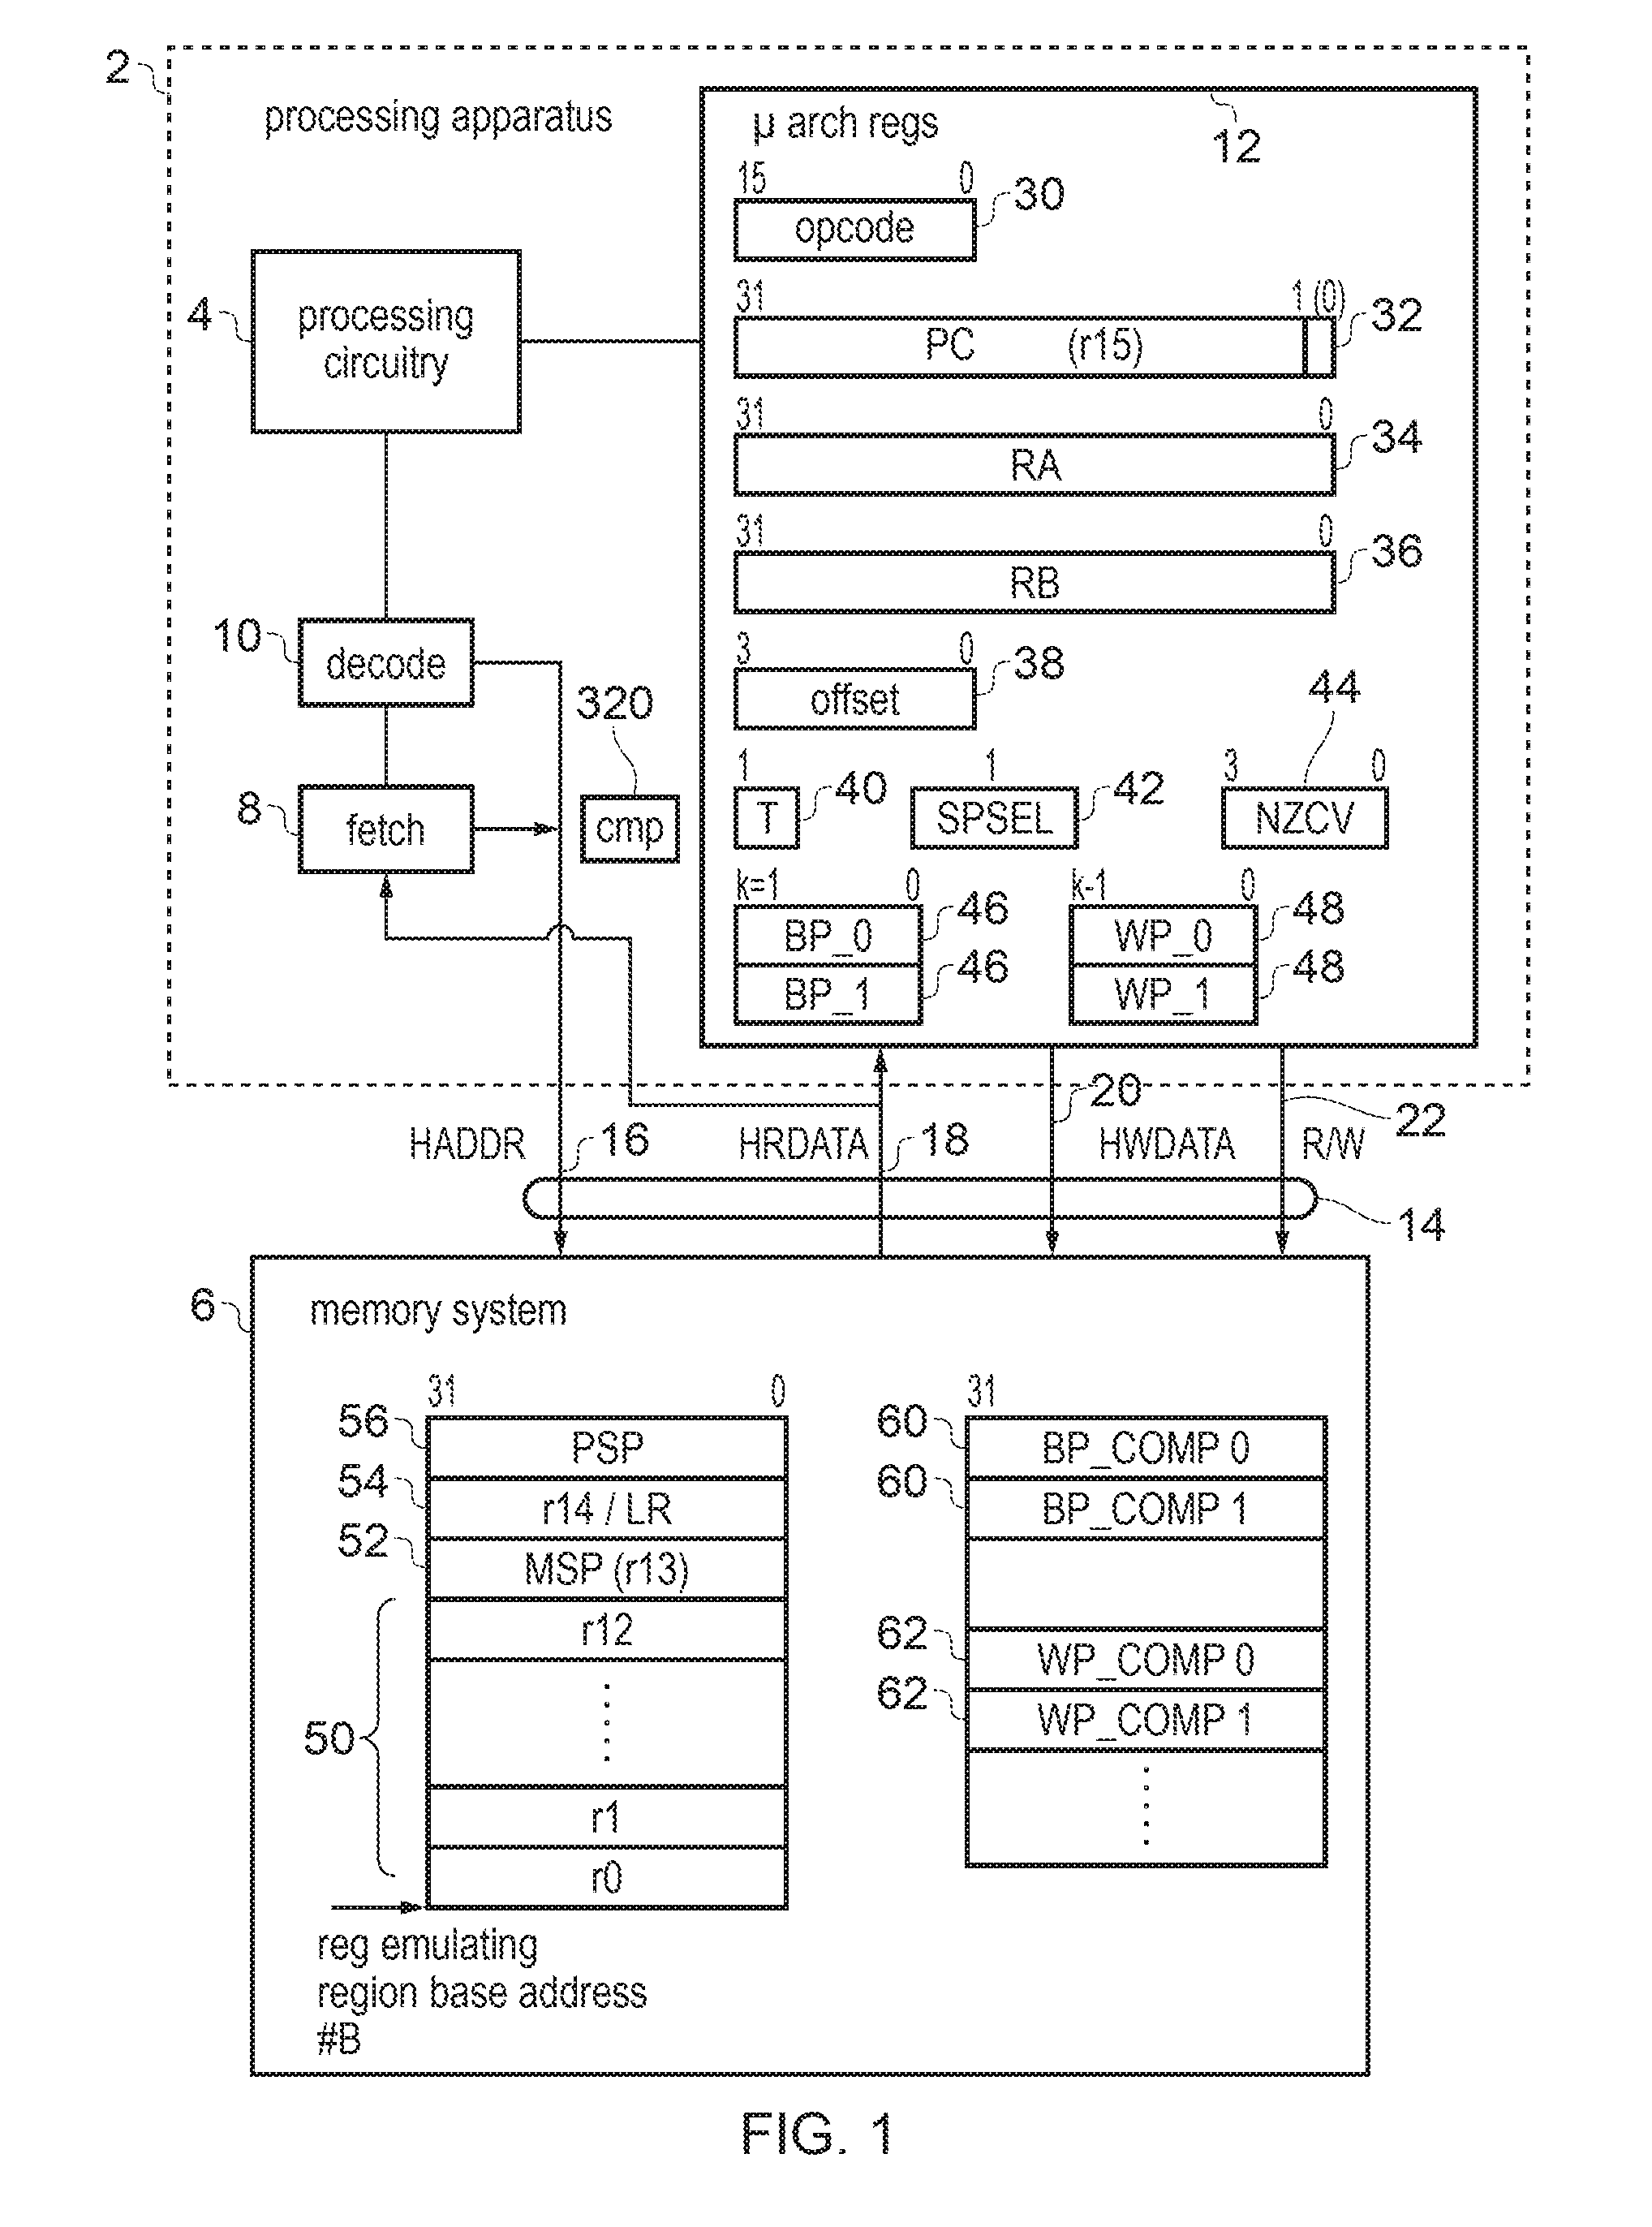 Apparatus with reduced hardware register set